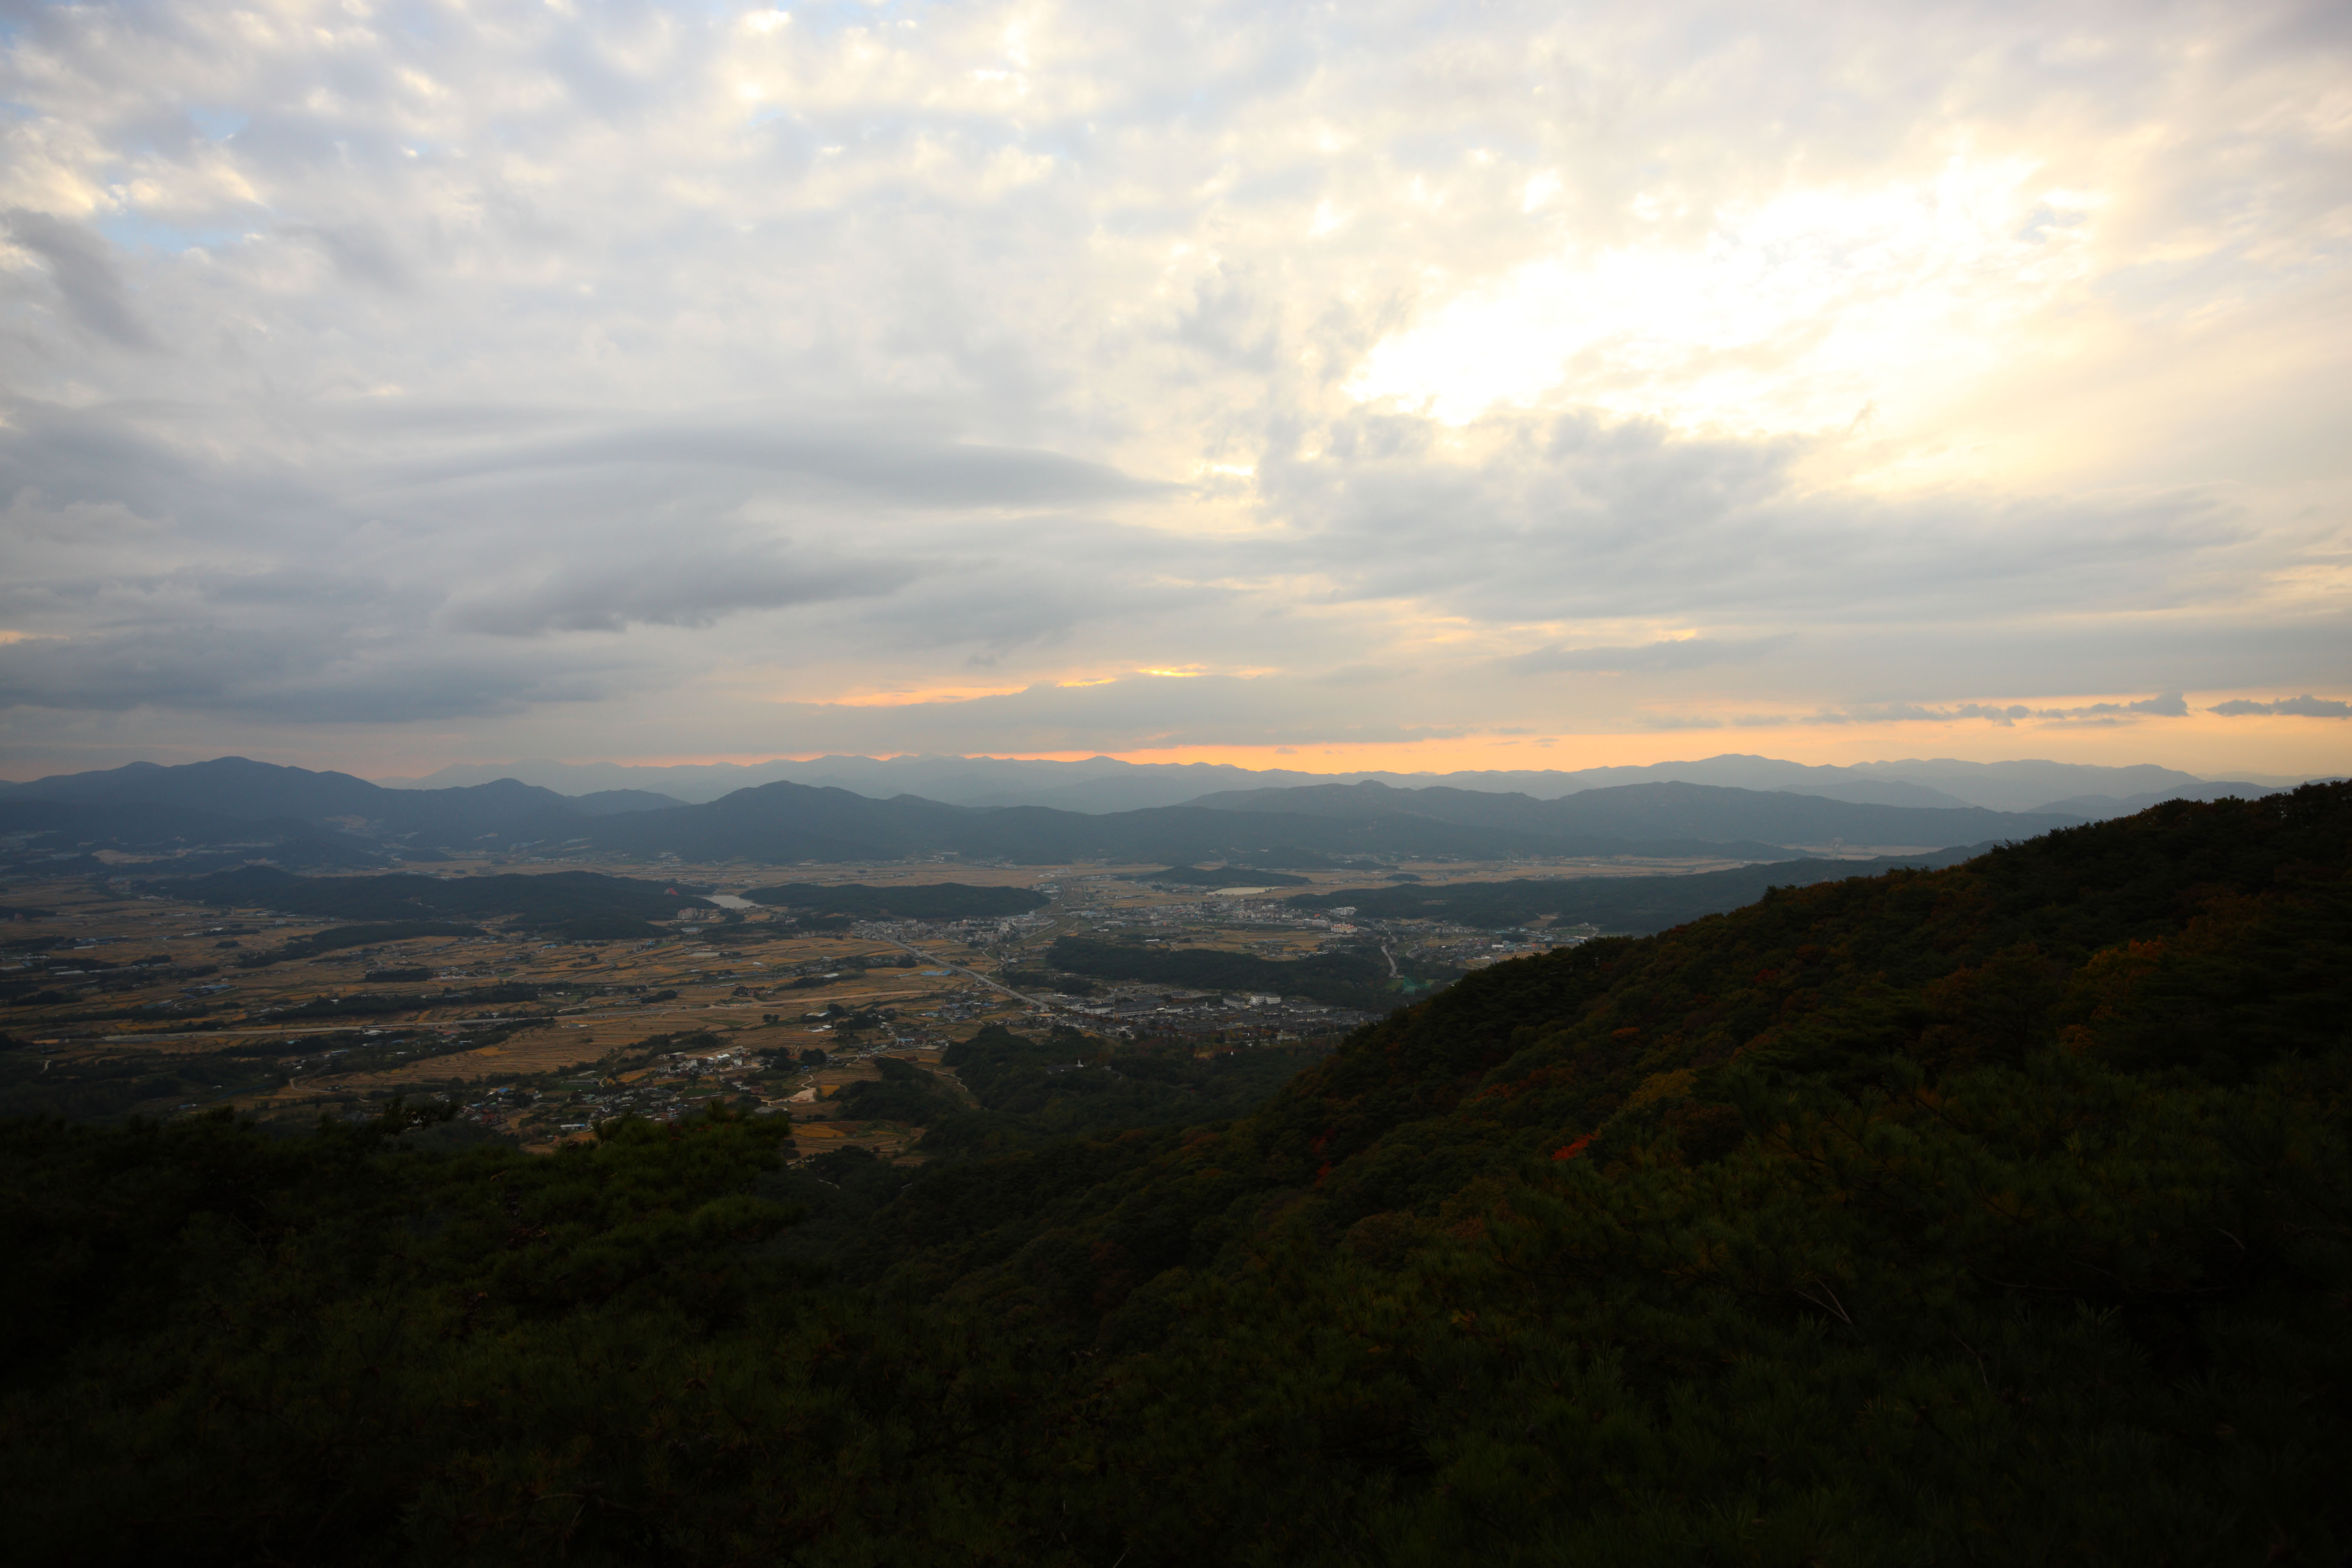 photo,material,free,landscape,picture,stock photo,Creative Commons,Gyeongju, rice field, cloud, At dark, village